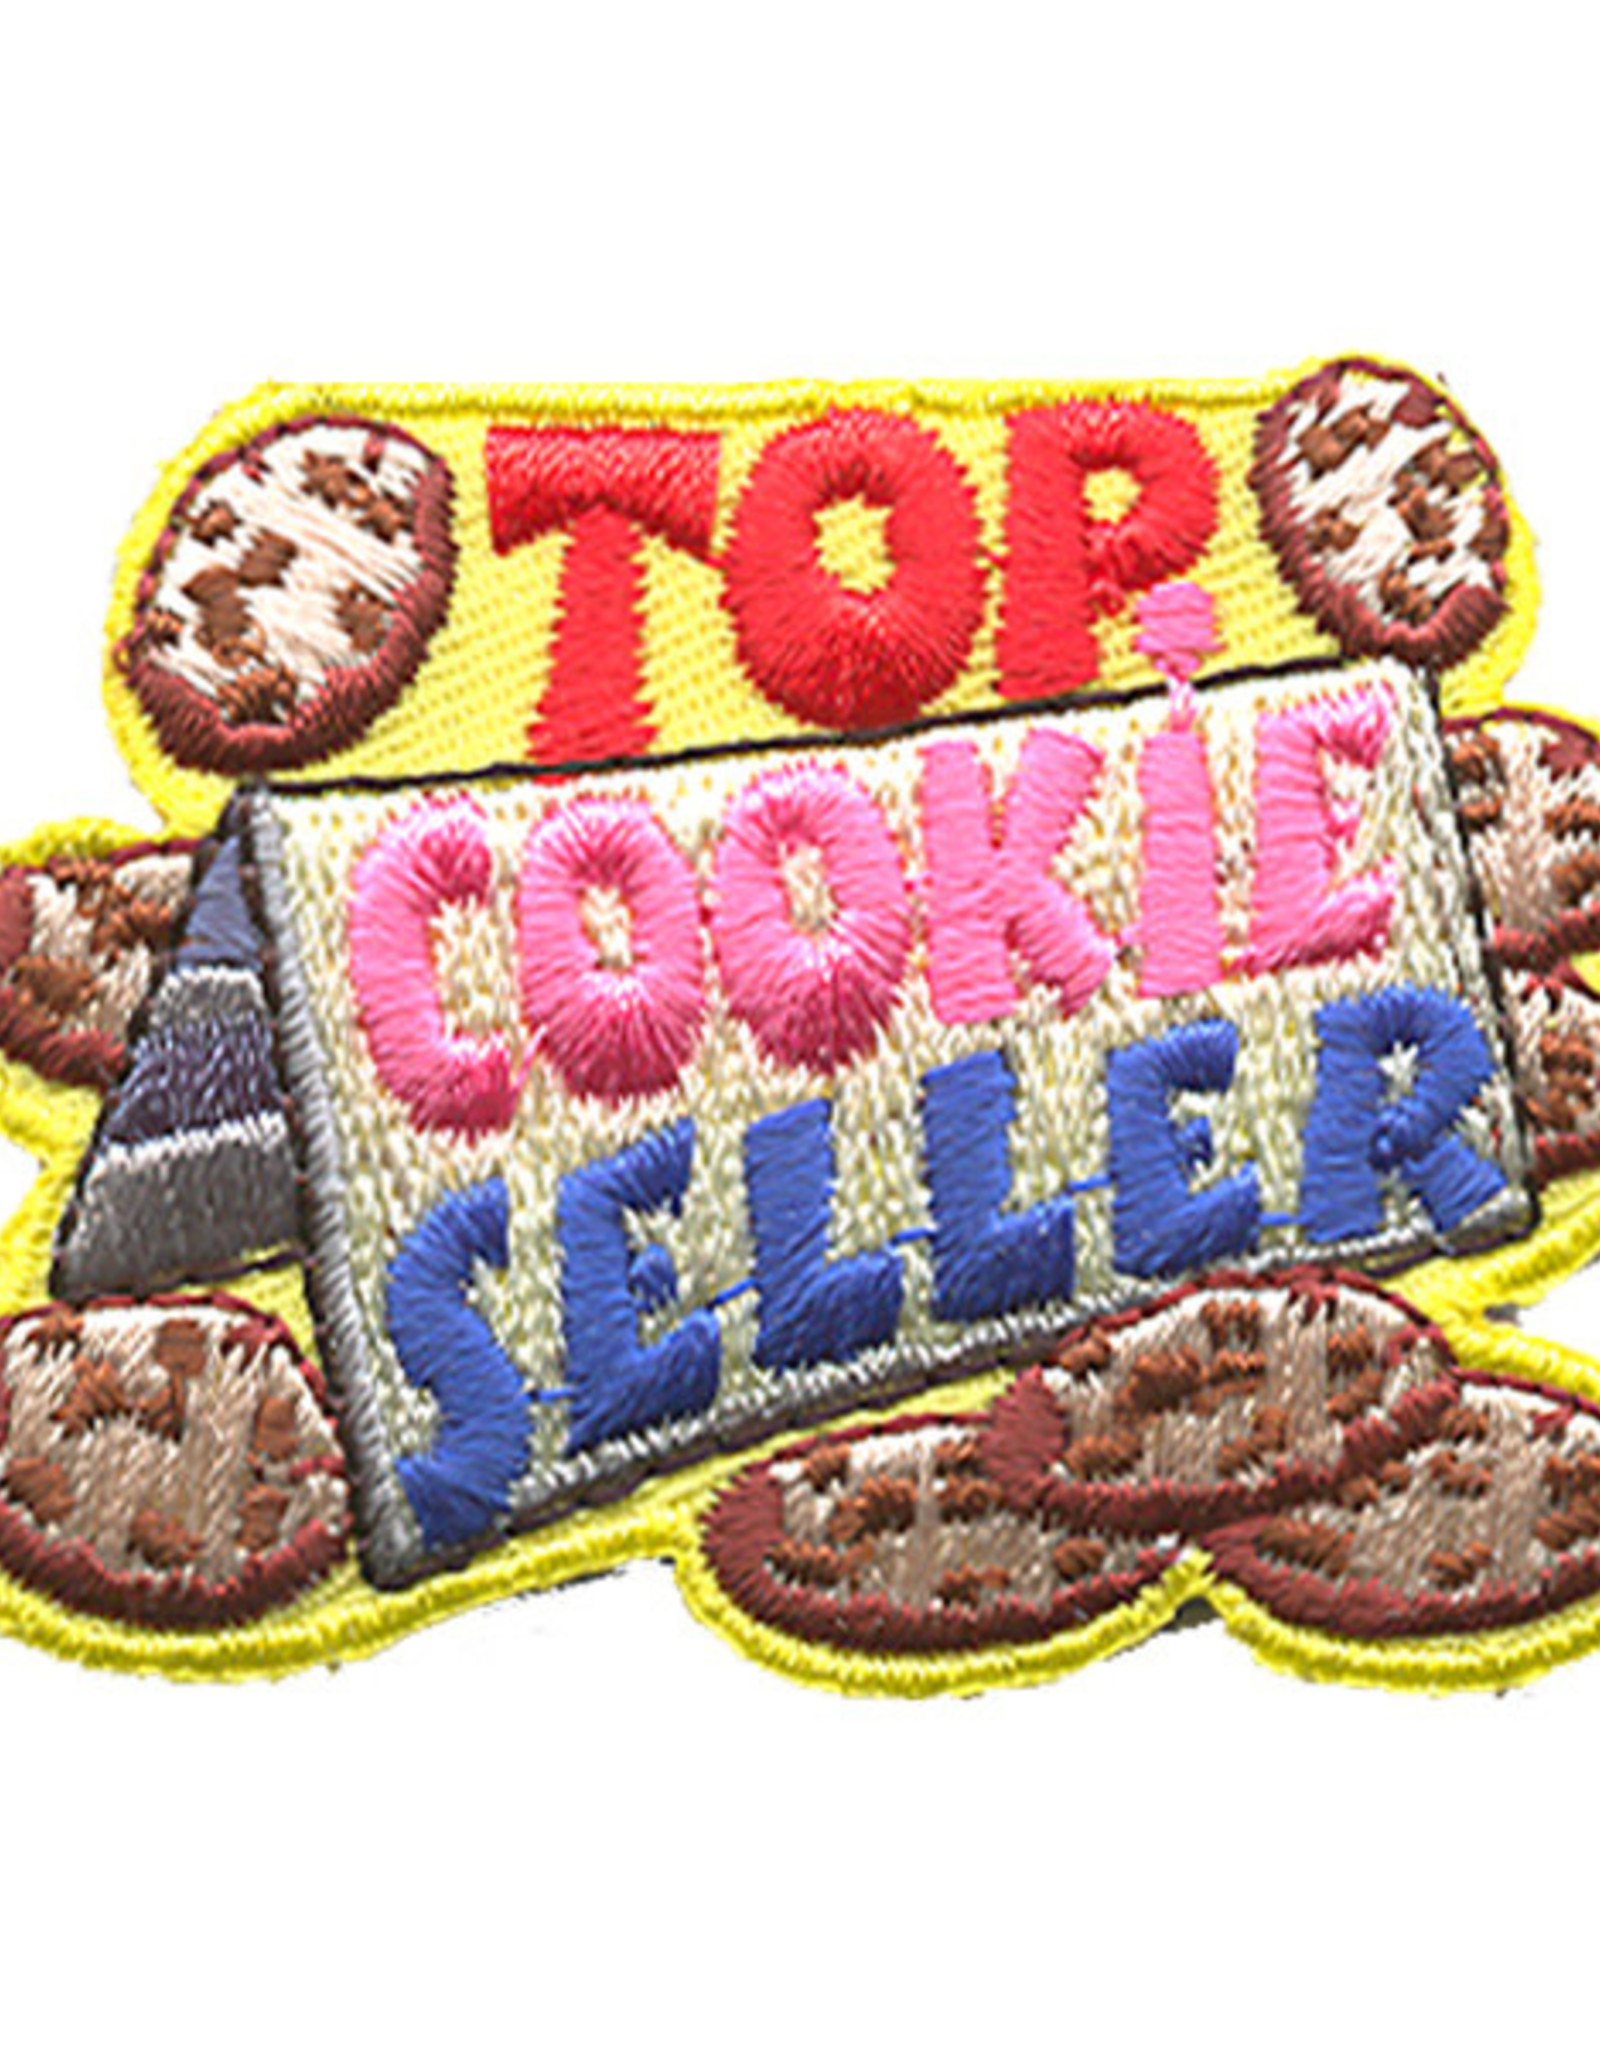 Advantage Emblem & Screen Prnt Top Cookie Seller Fun Patch /w sign and ...